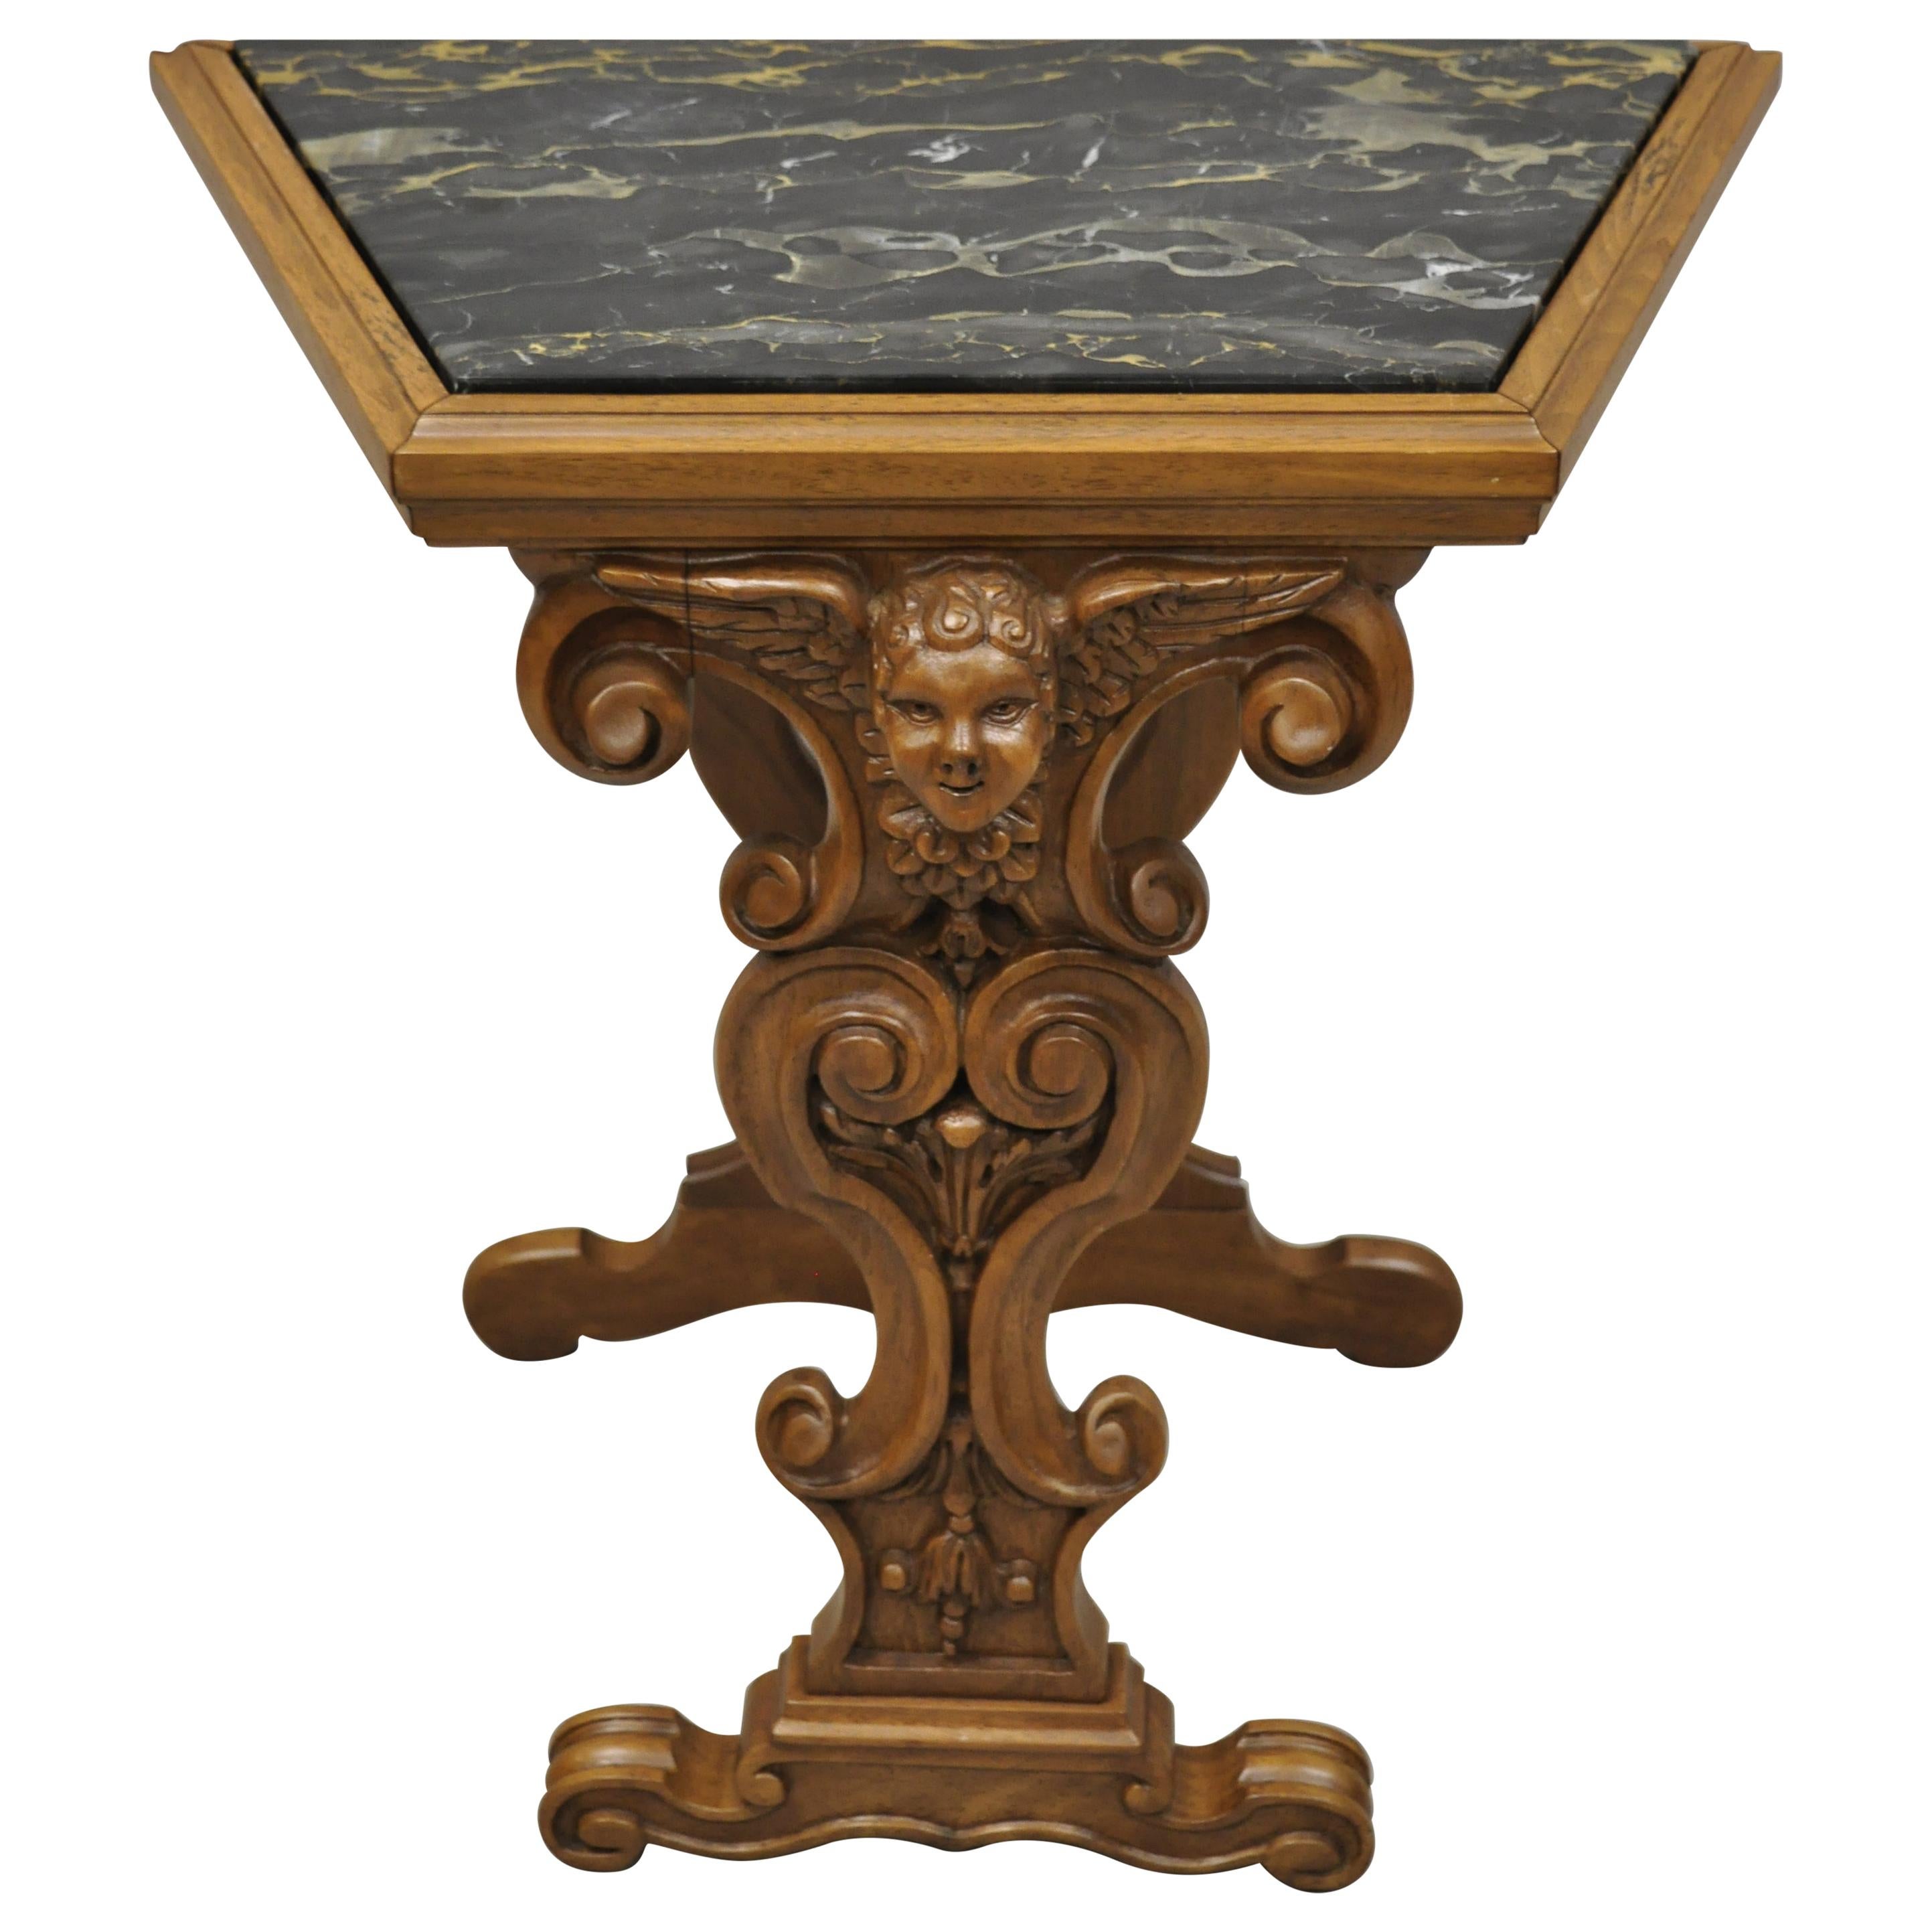 Italian Renaissance Figural Carved Marble Top Side Table with Winged Cherub Head For Sale